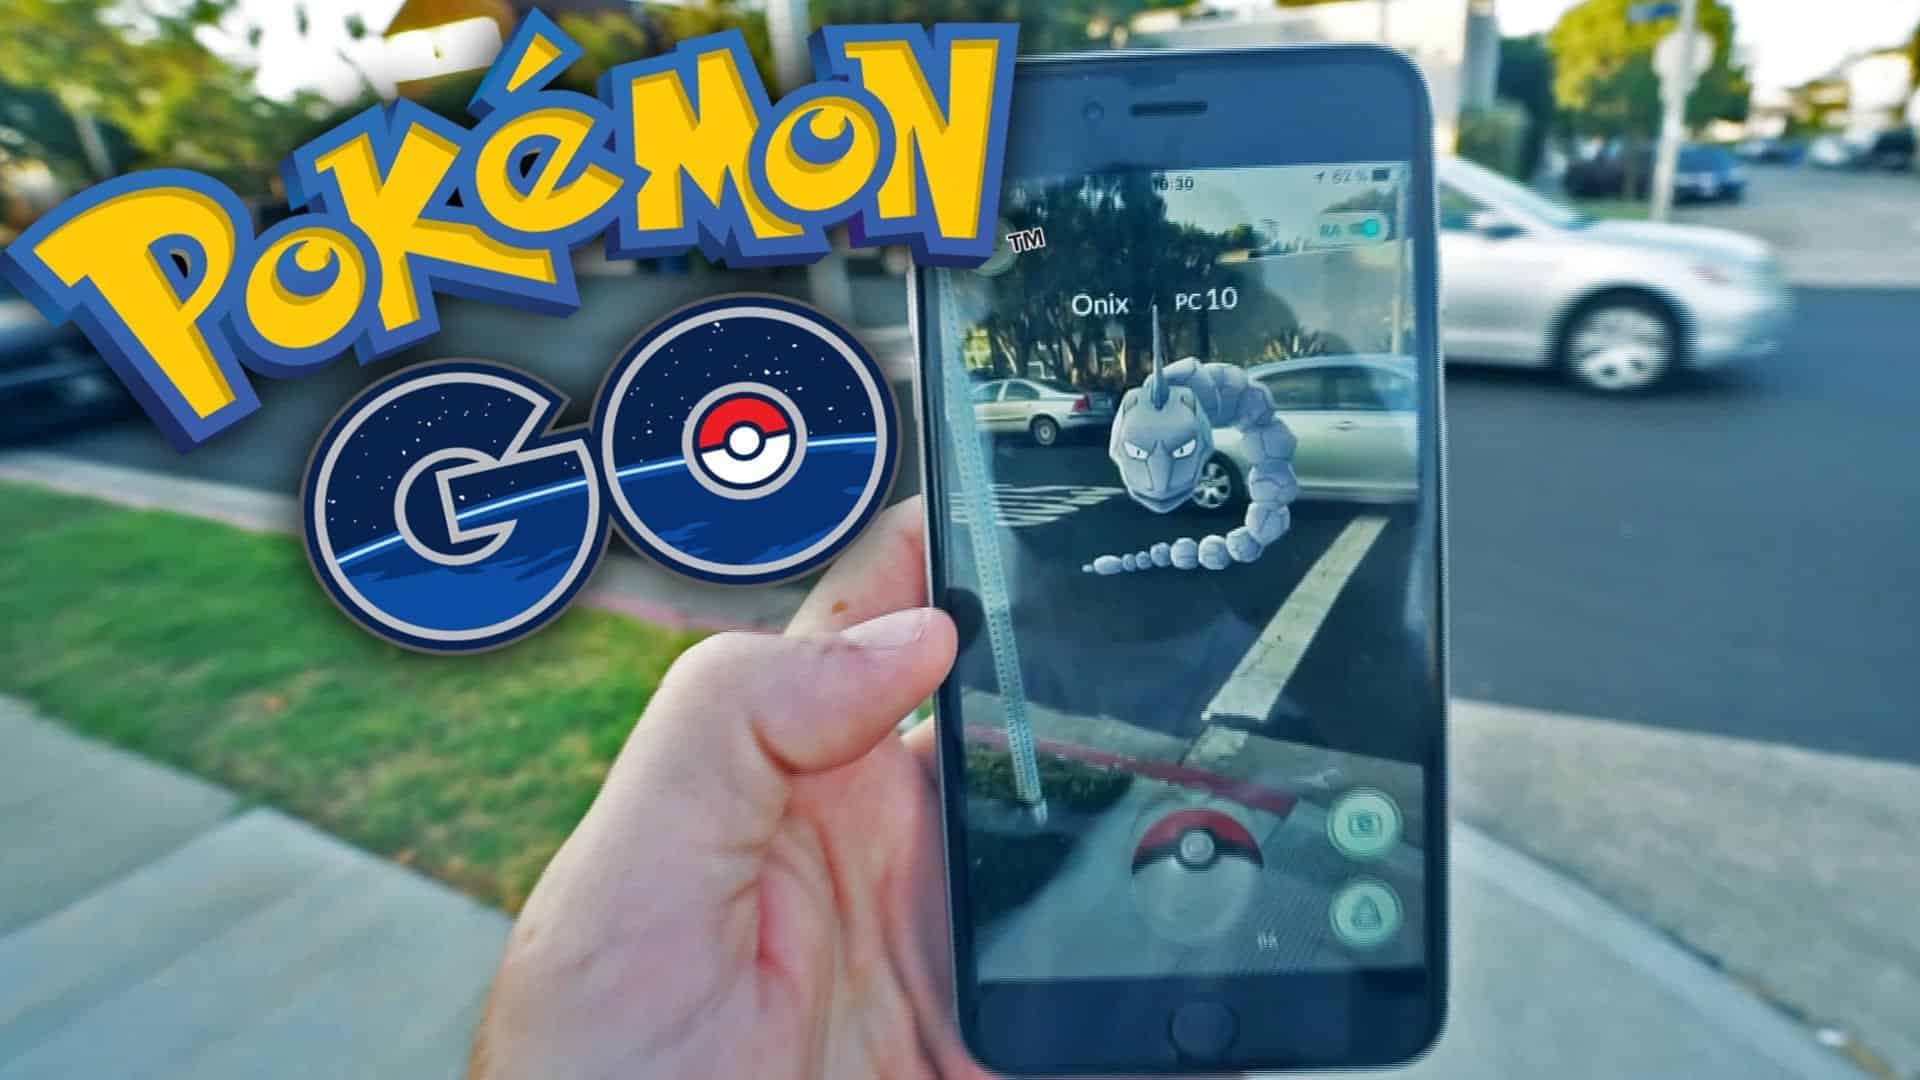 Pokemon Go Officially Launched In India With The Partnership of Reliance Jio Infocom Ltd. - 5